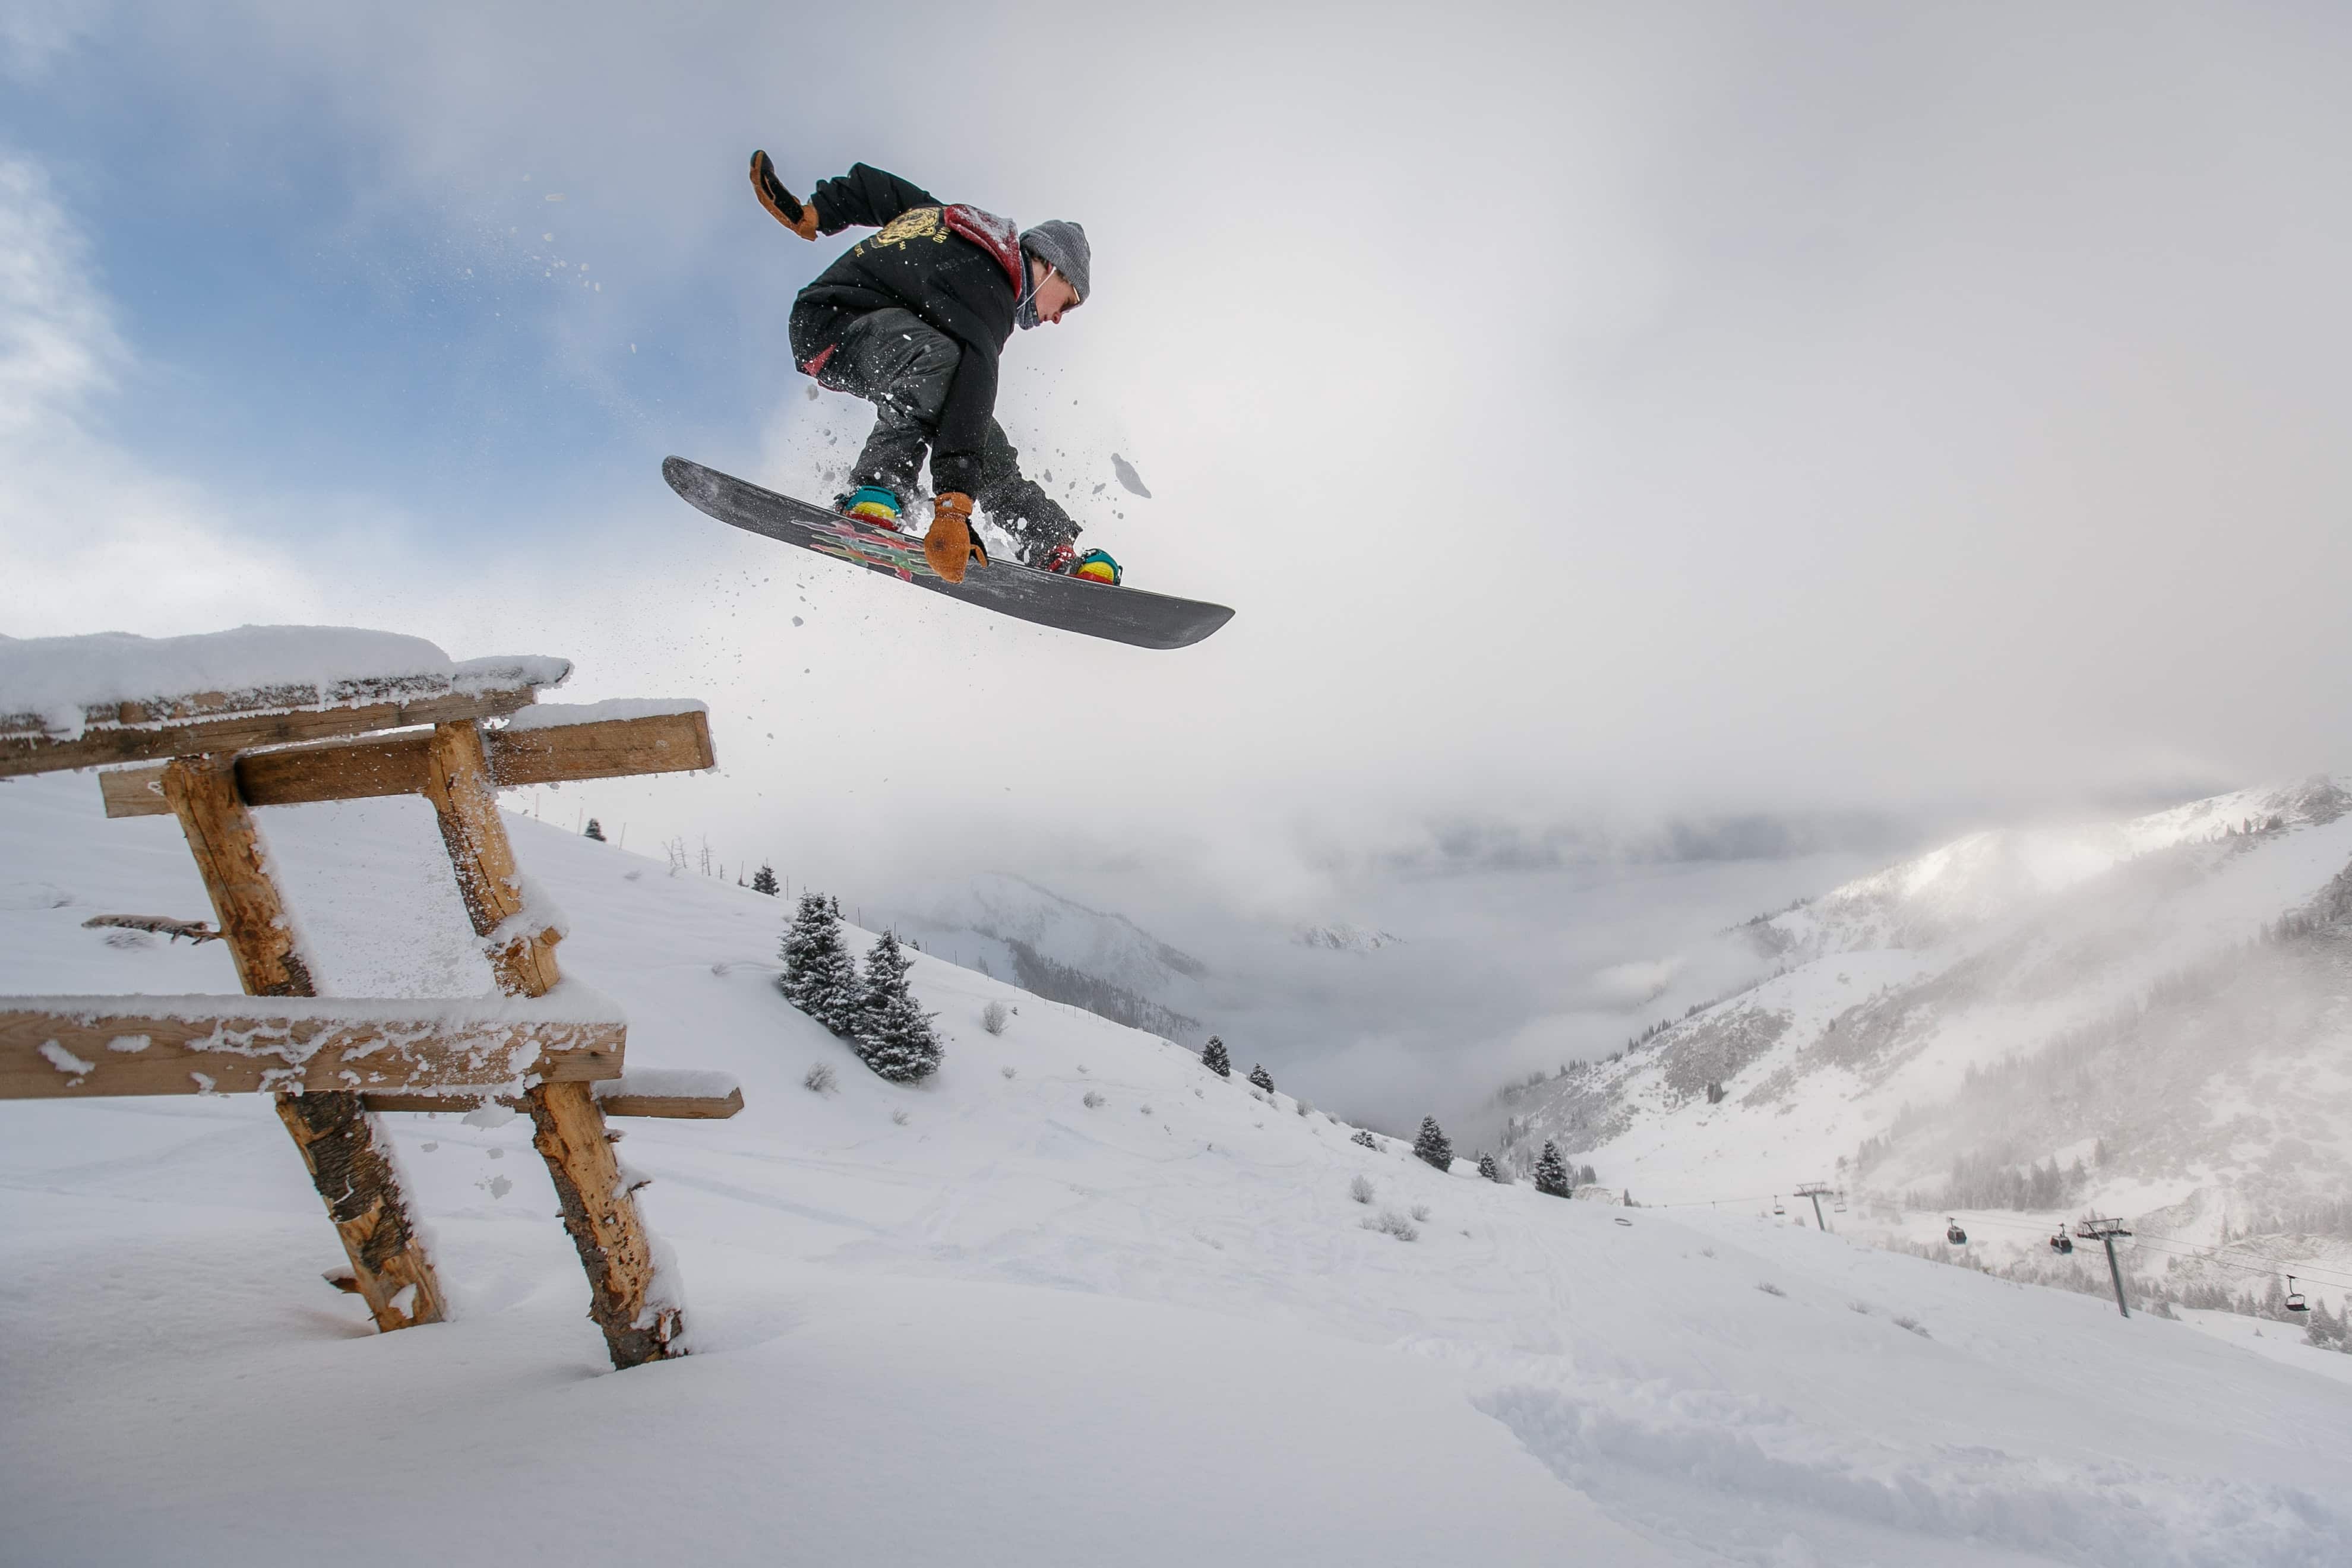 Snowboarder jumping over wooden bench in snow